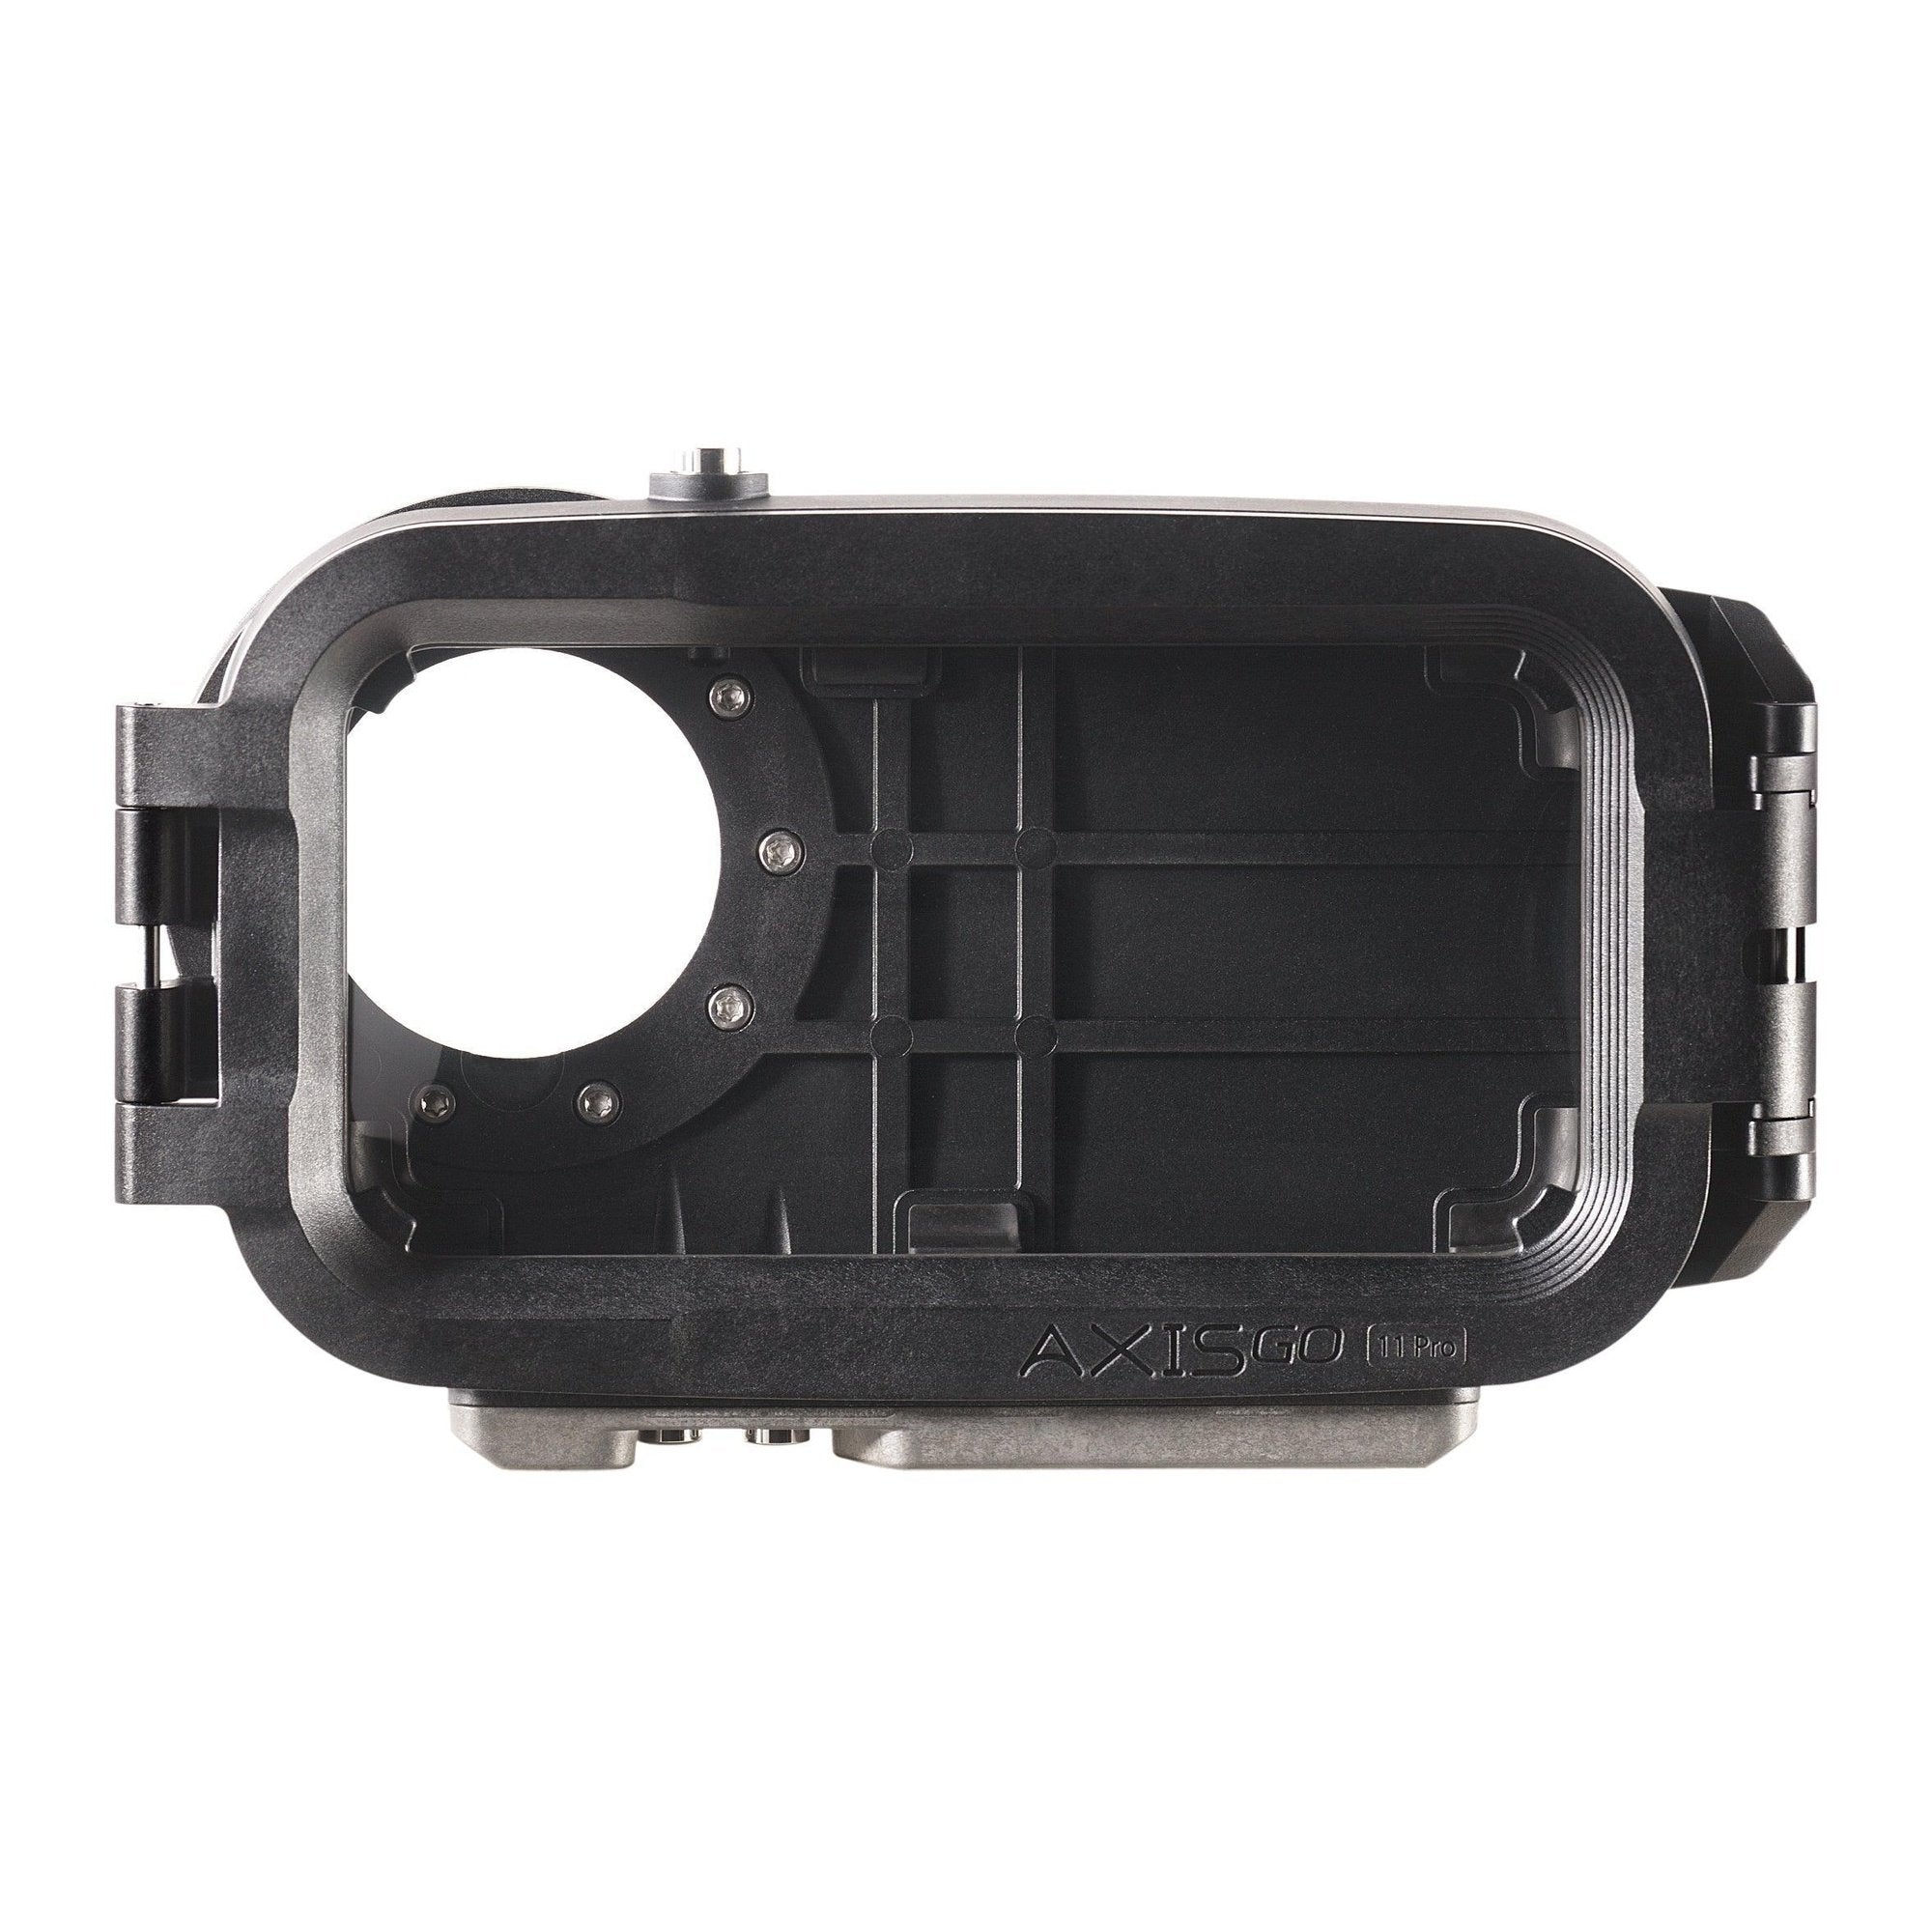 AxisGO Underwater Housing for iPhone 11 Pro Max – AquaTech Imaging Solutions